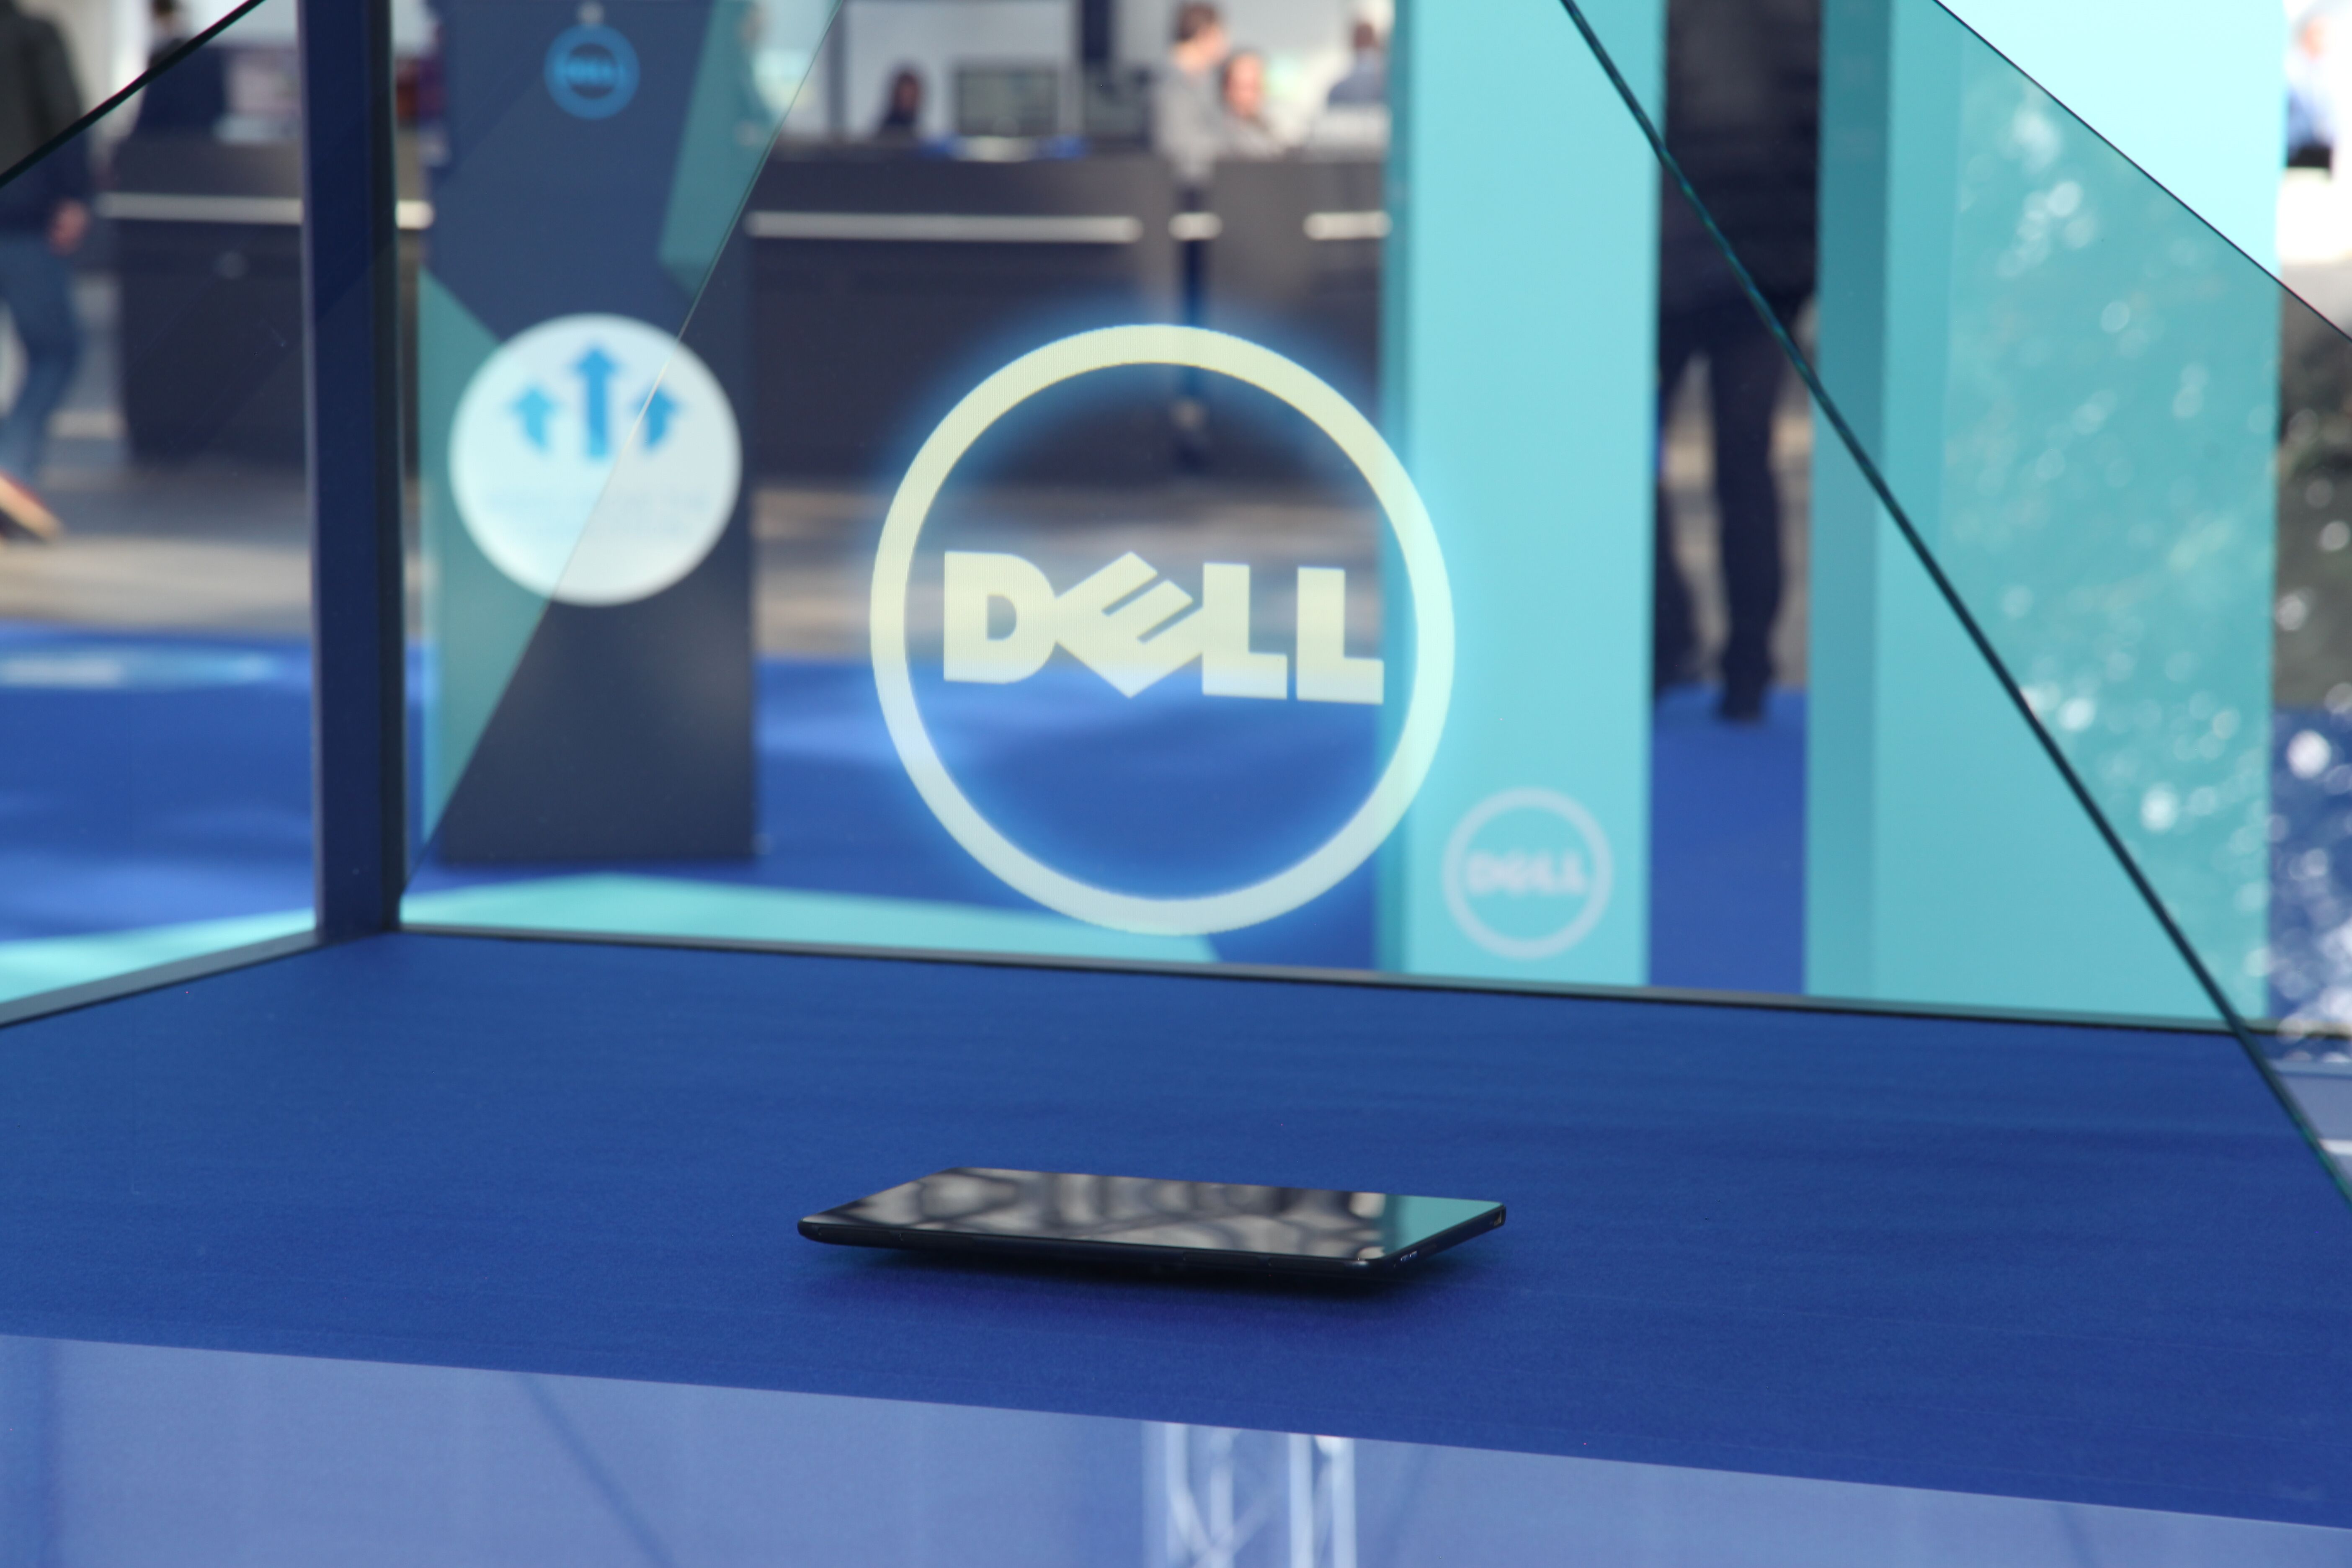 DELL cuts through ‘Trade Fair noise’ with Realfiction